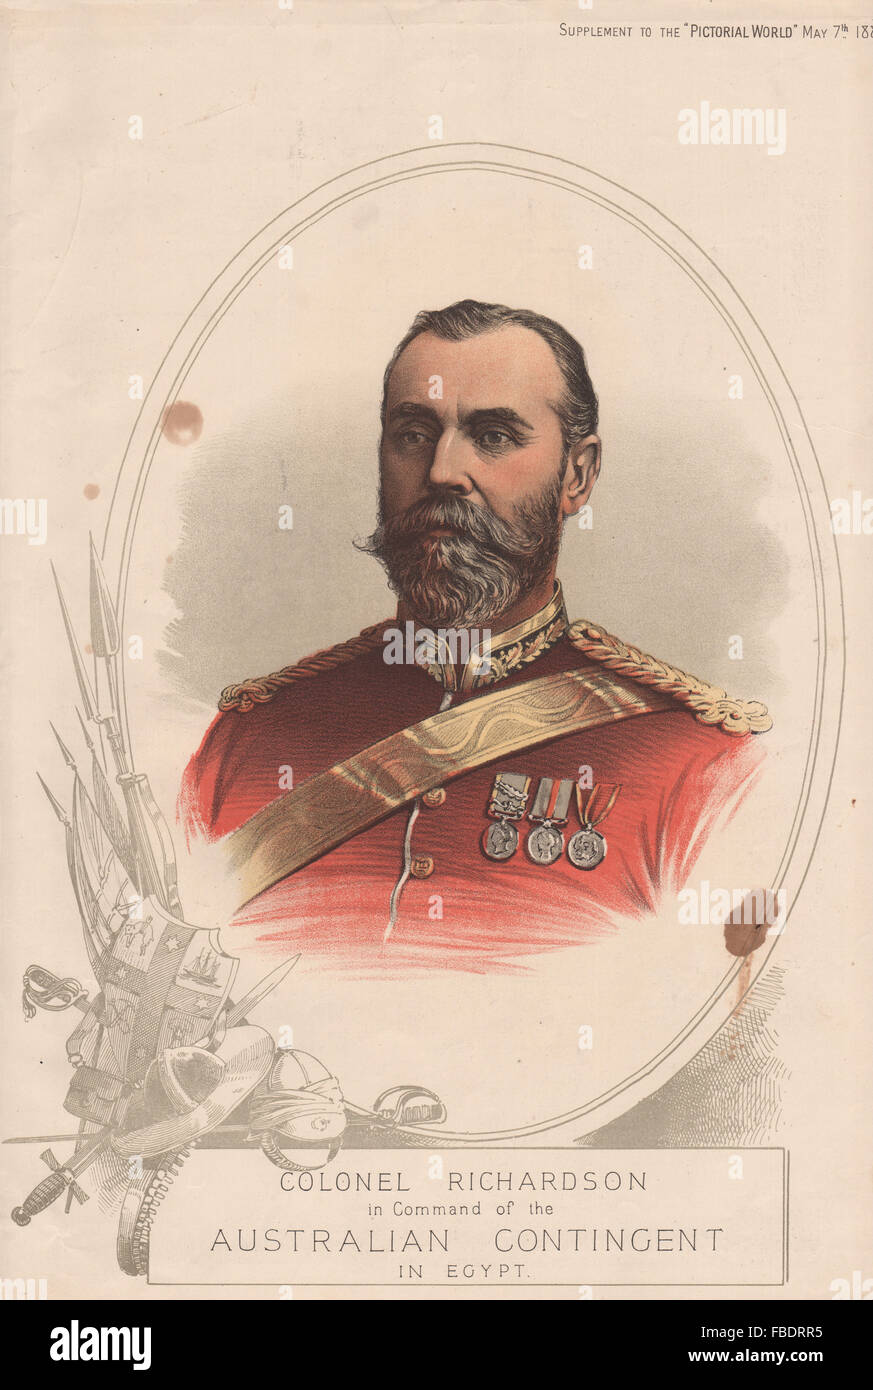 Colonel Richardson in Command of the Australian Contingent in Egypt, 1885 Stock Photo